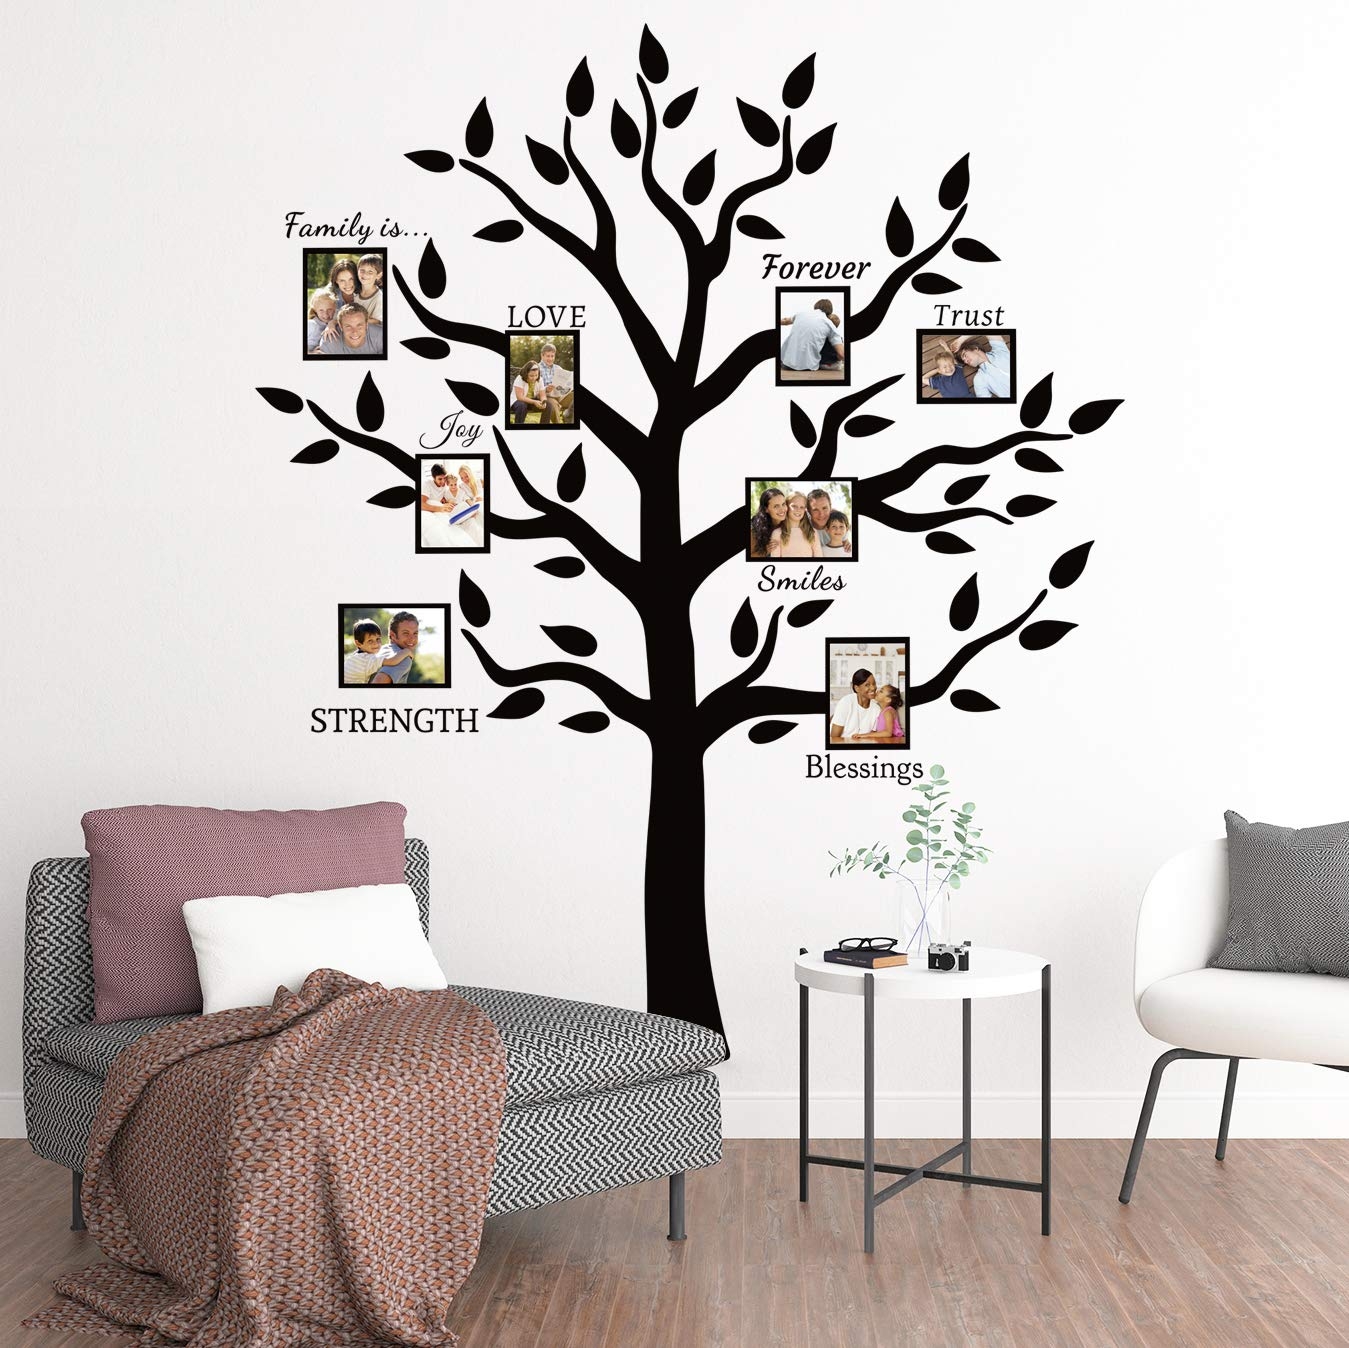 Spiritual Scripture Family Art Look Up Wall Decal Inspiration Living Room 